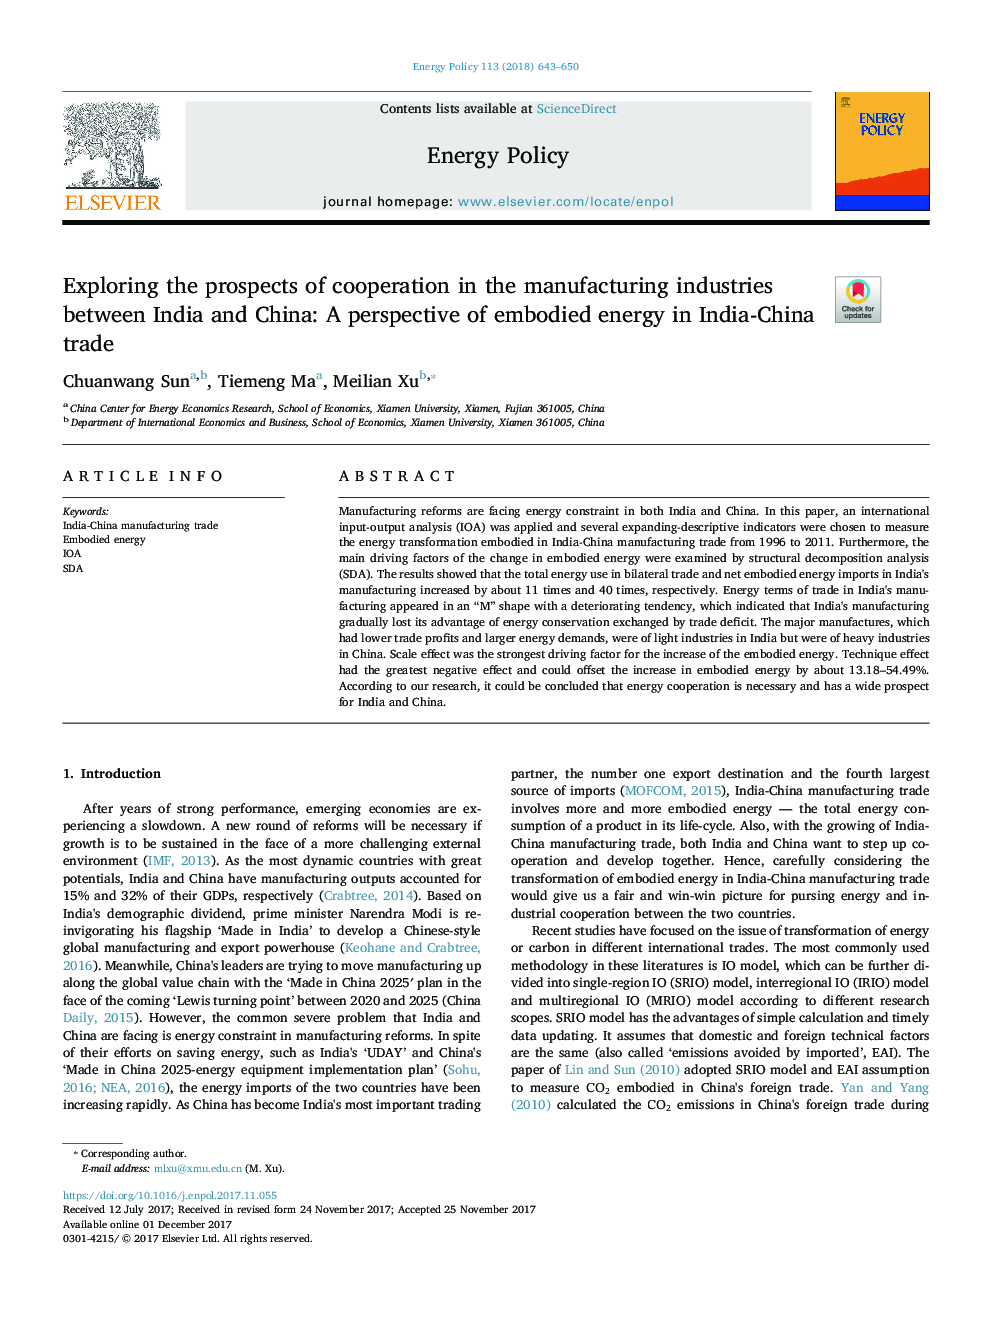 Exploring the prospects of cooperation in the manufacturing industries between India and China: A perspective of embodied energy in India-China trade